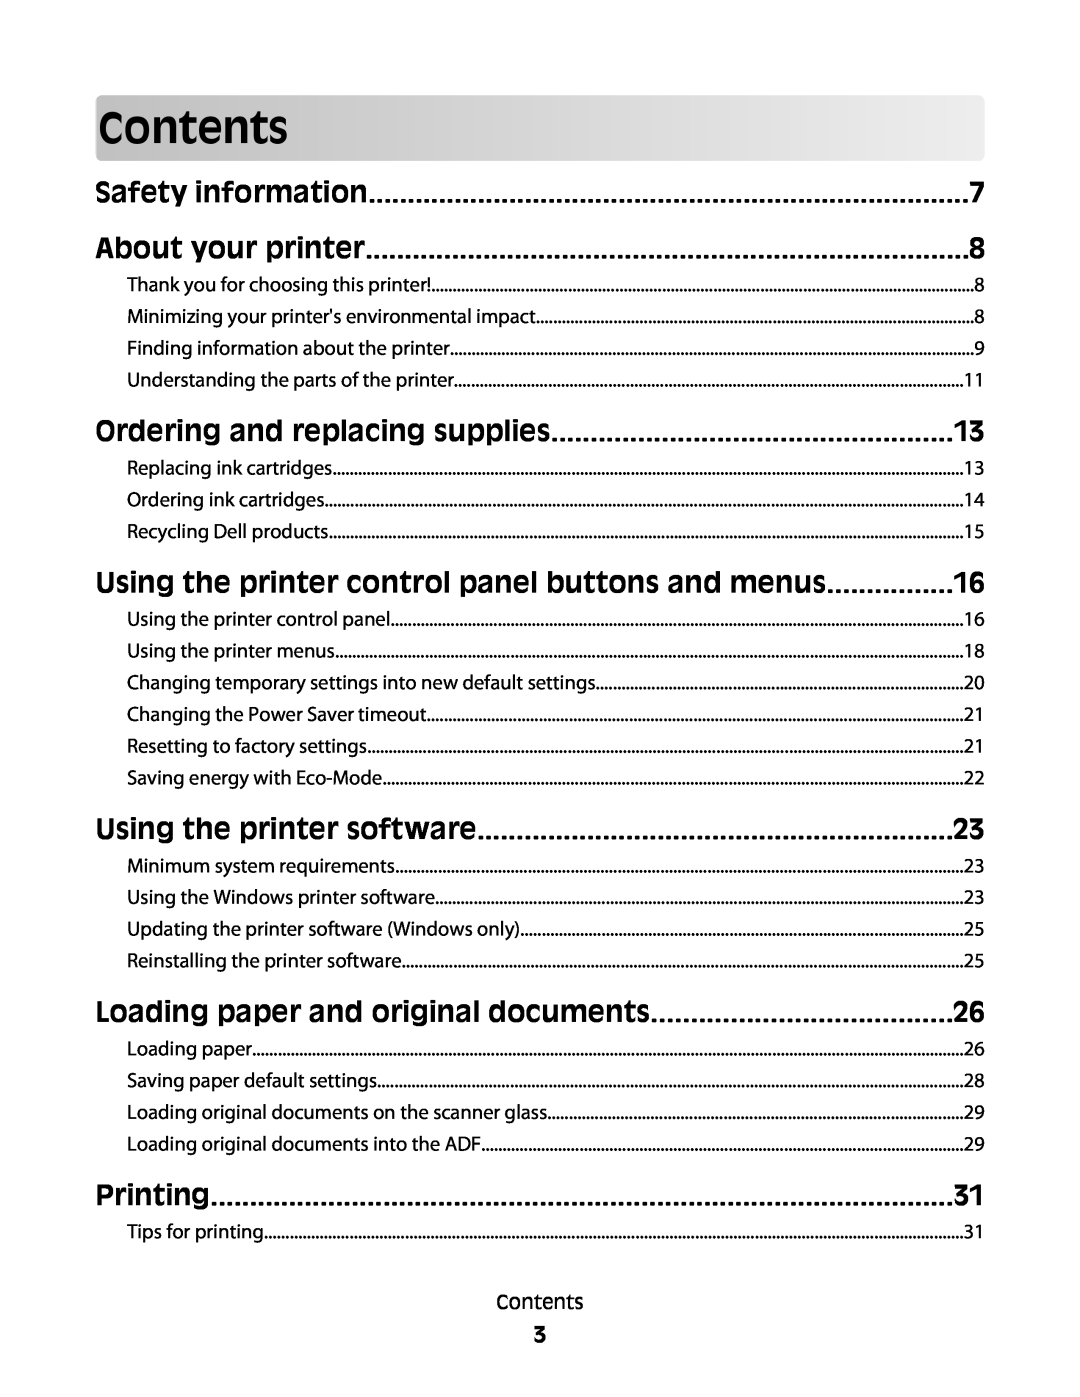 Dell V515W Contents, Safety information, About your printer, Ordering and replacing supplies, Using the printer software 